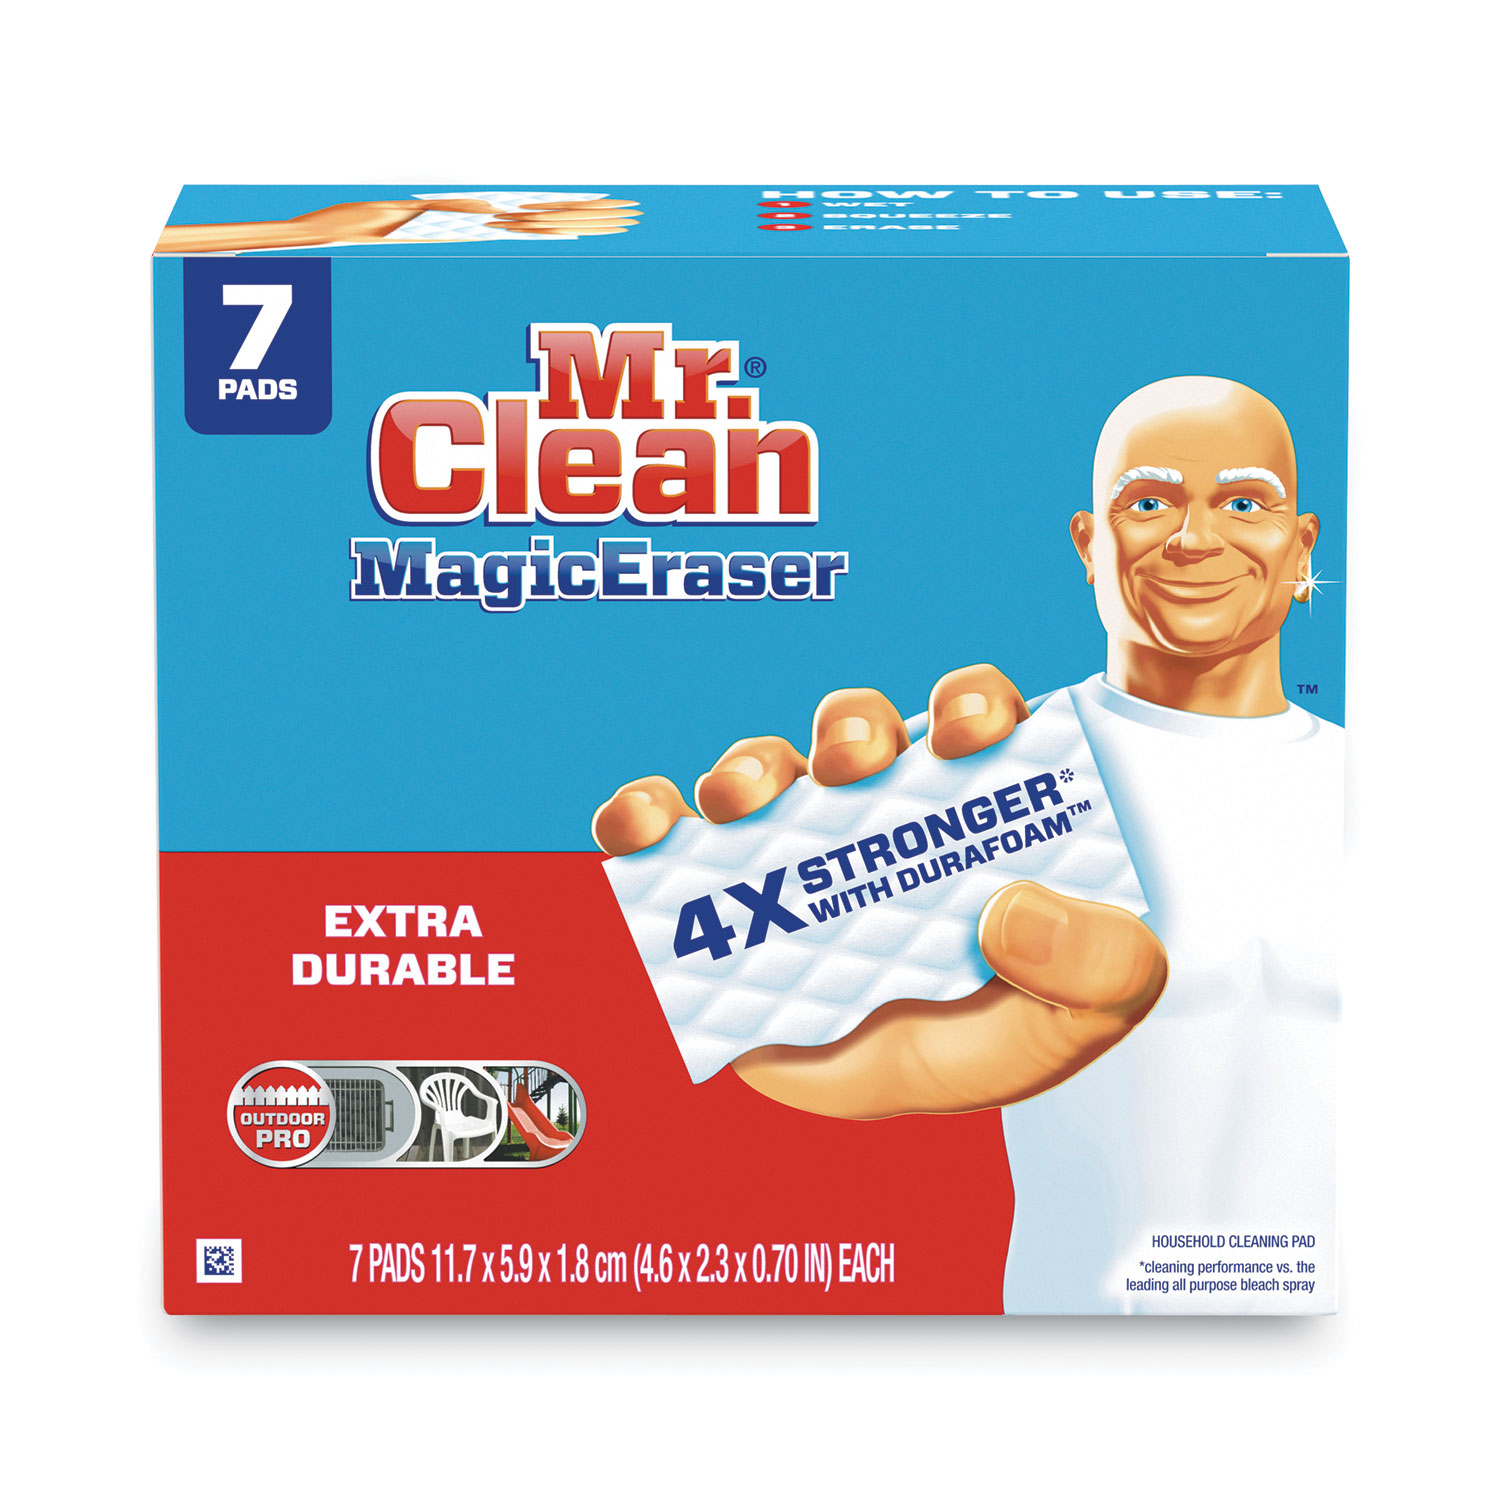 Banish Stubborn Grime with the Powerful Cleaning Magic of Mr. Clean Eraser